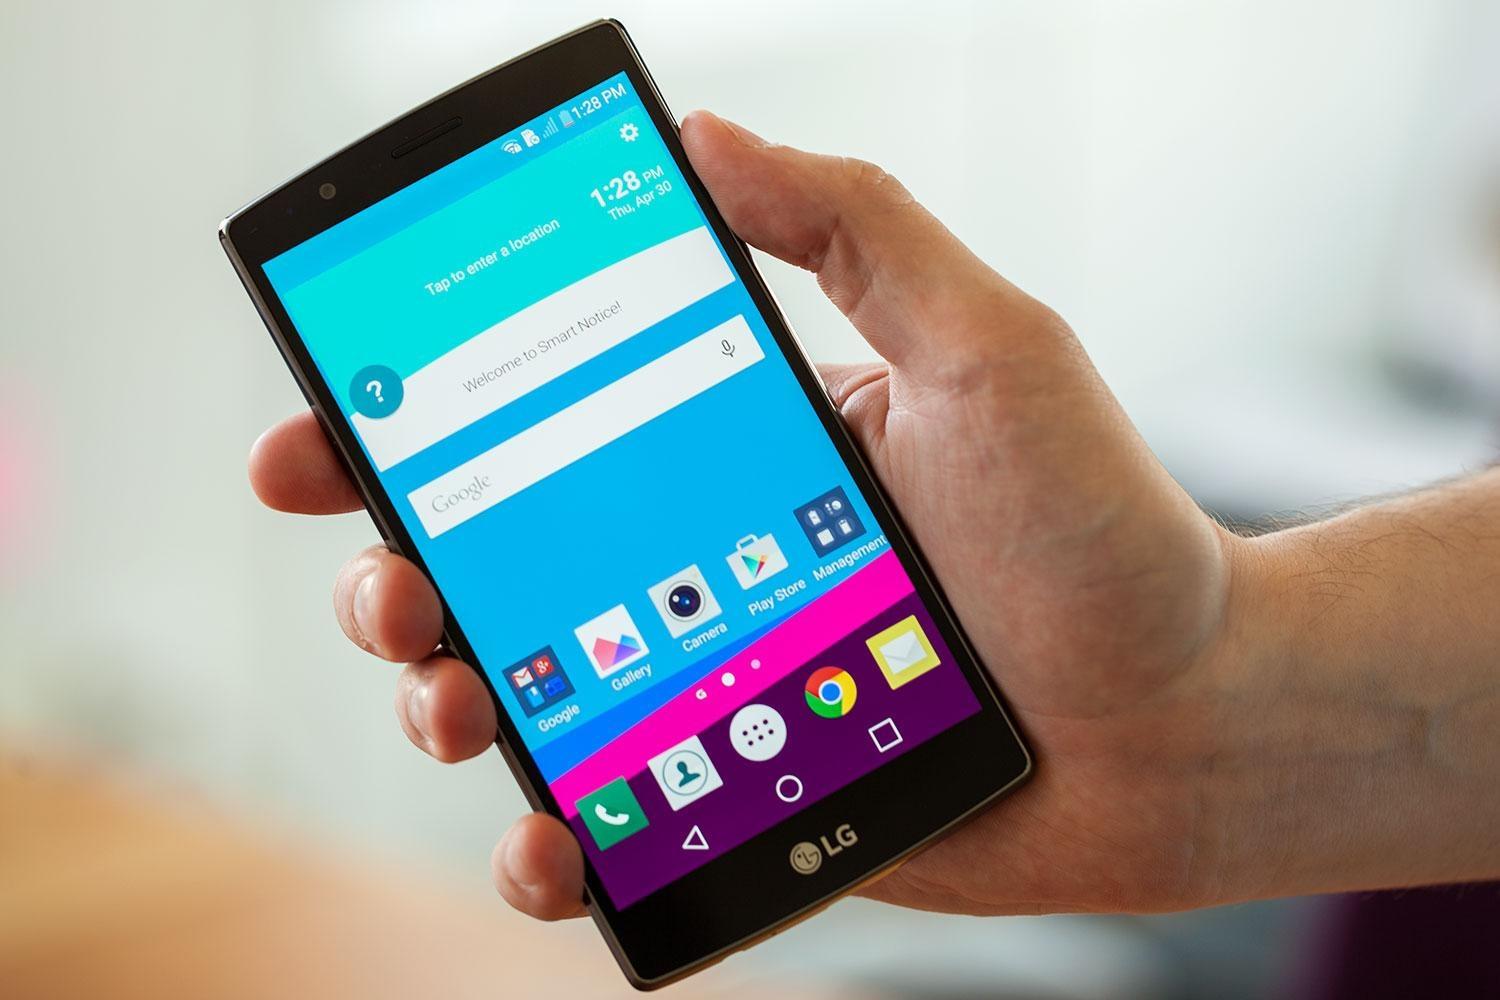 lg g4 in hand 1500x1000